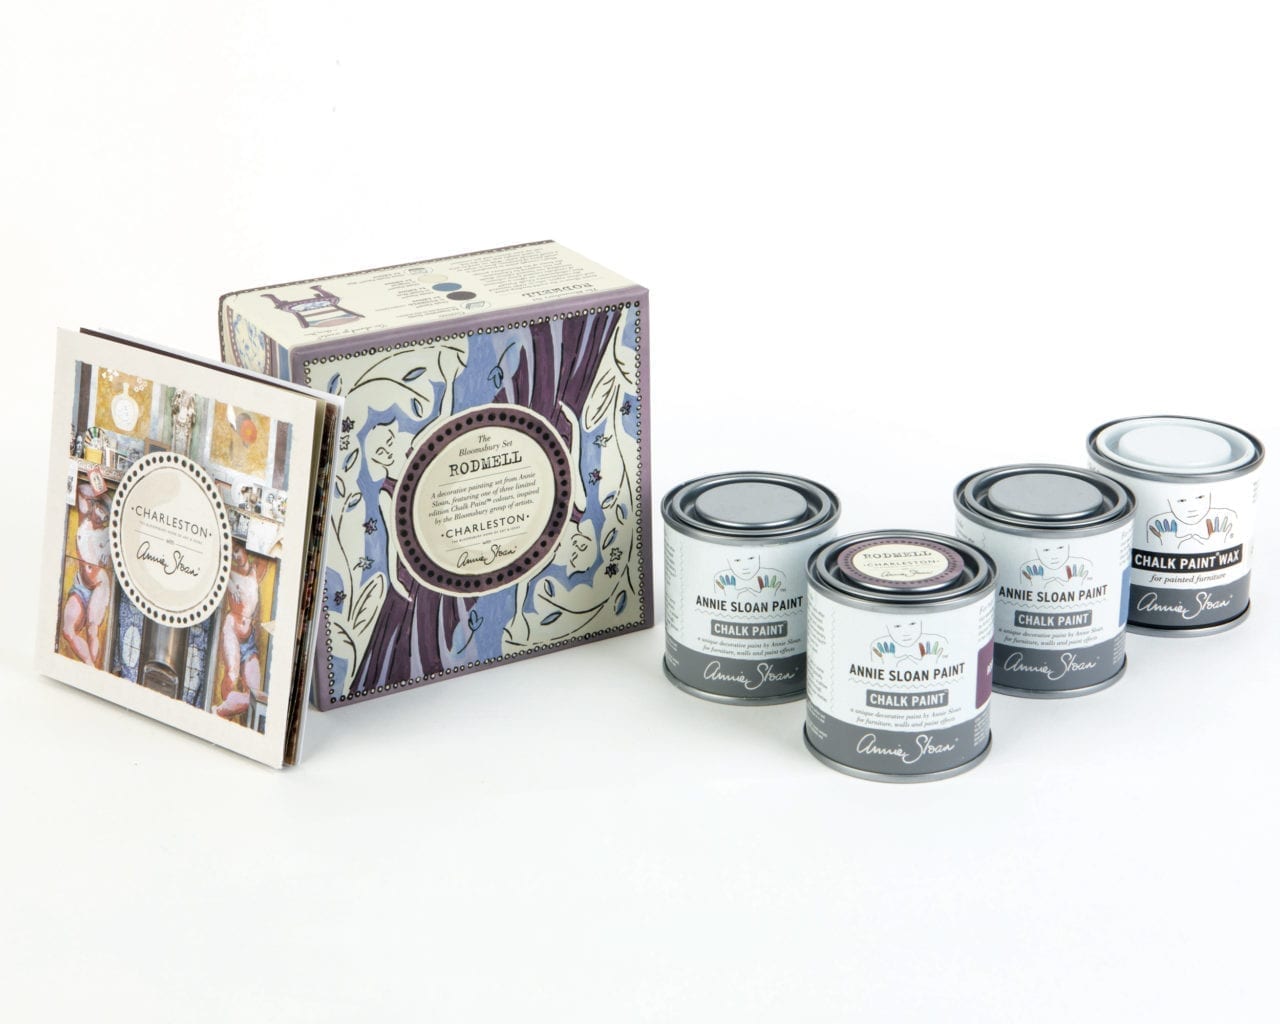 Annie Sloan with Charleston: Decorative Paint Set in Rodmell – Liz's  Beautiful Things